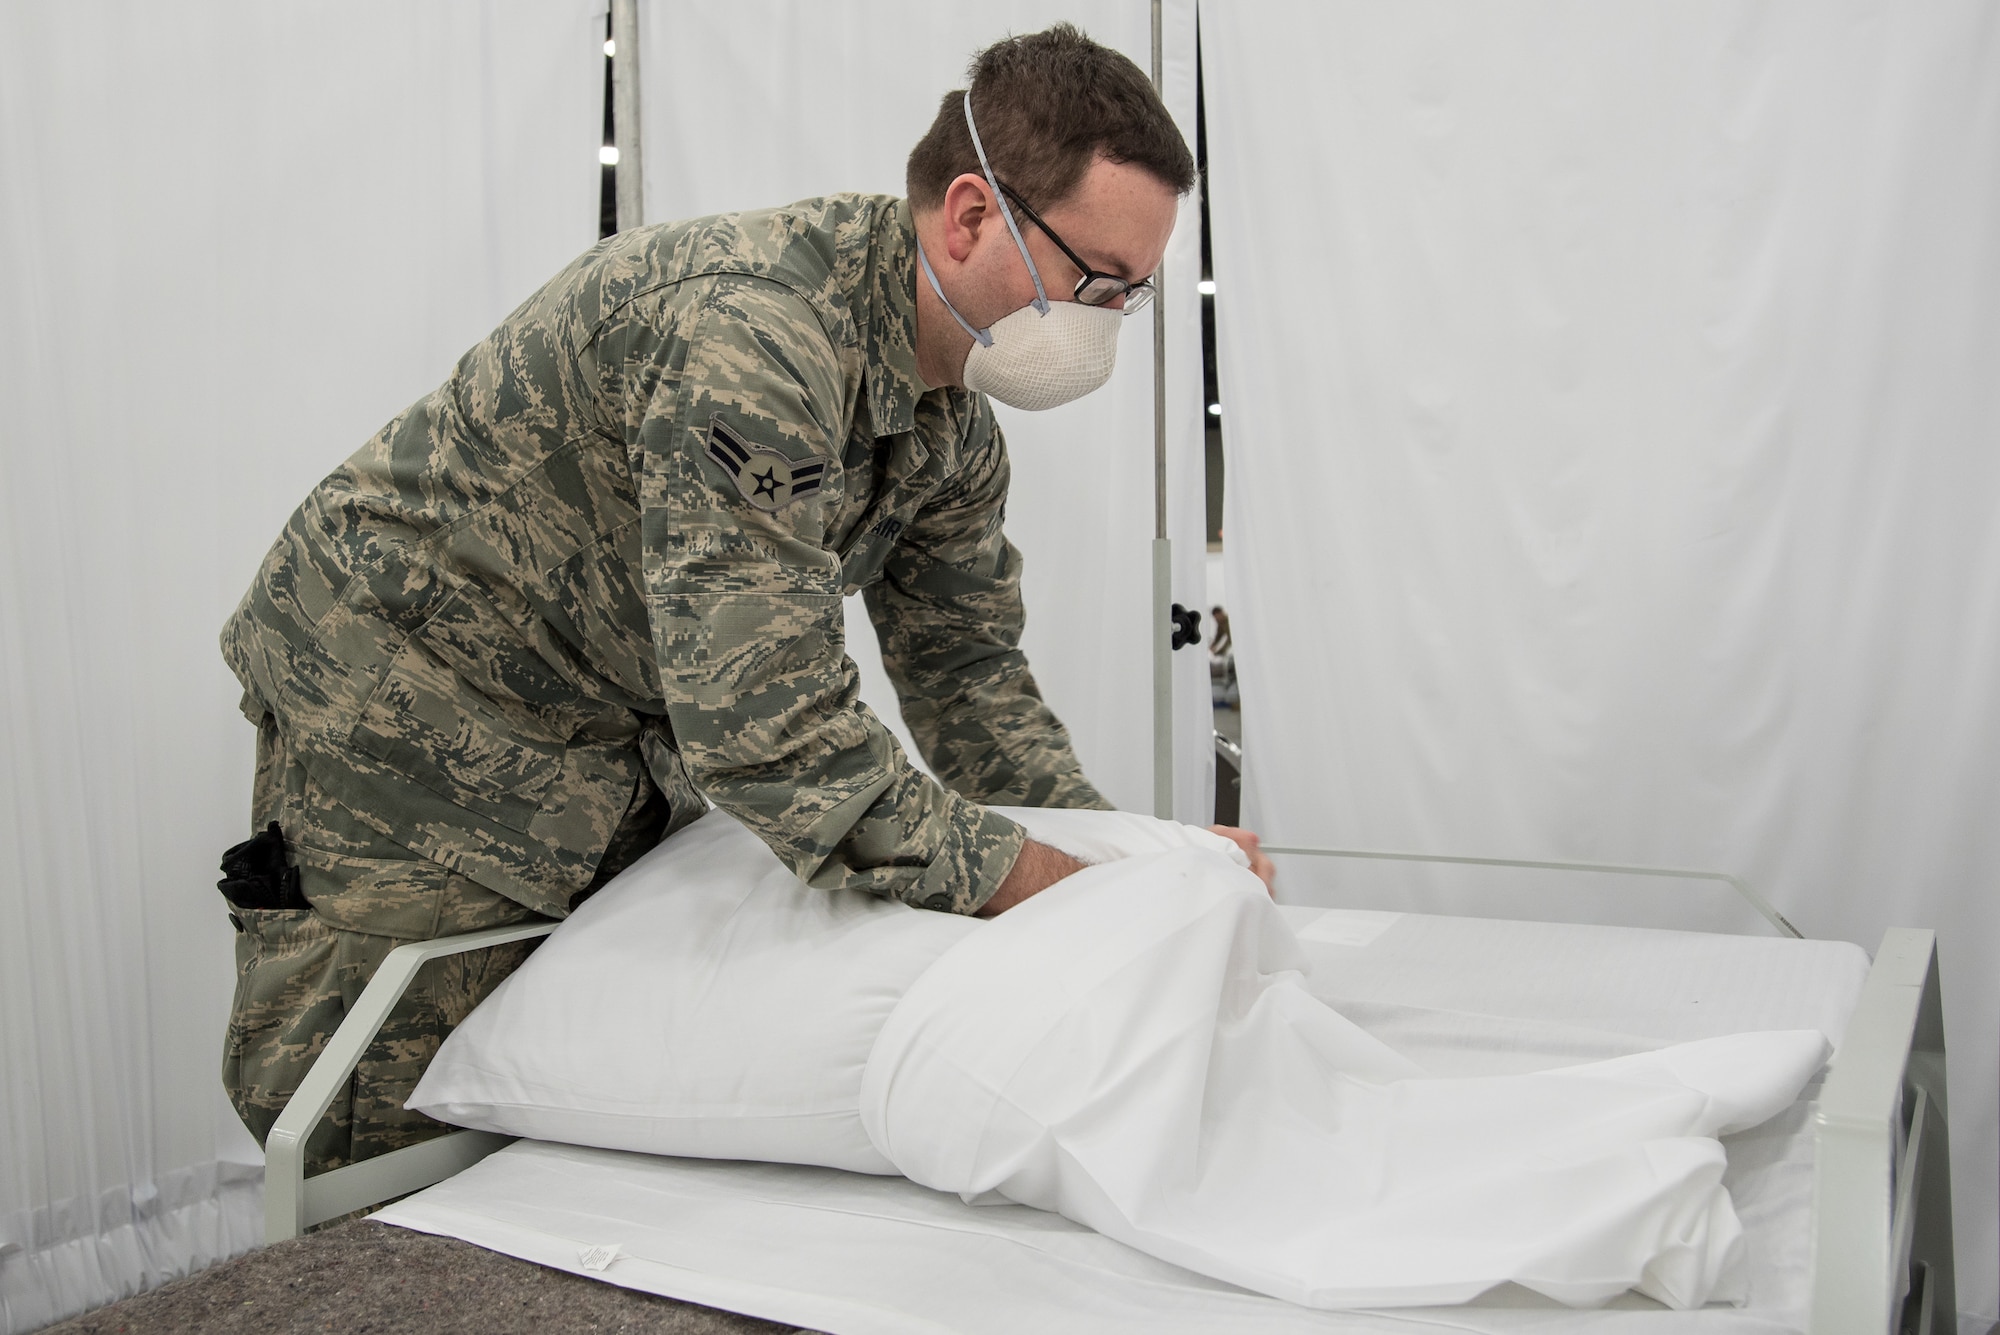 Airman 1st Class Trevor Johnson of the Kentucky Air National Guard’s 123rd Civil Engineer Squadron cases pillows for an Alternate Care Facility at the Kentucky Fair and Exposition Center in Louisville, Ky., April 14, 2020. The site, which is expected to be operational April 15, will treat patients suffering from COVID-19 if area hospitals exceed available capacity. The location initially will offer care for up to 288 patients and is scalable to 2,000 beds. (U.S. Air National Guard photo by Dale Greer)